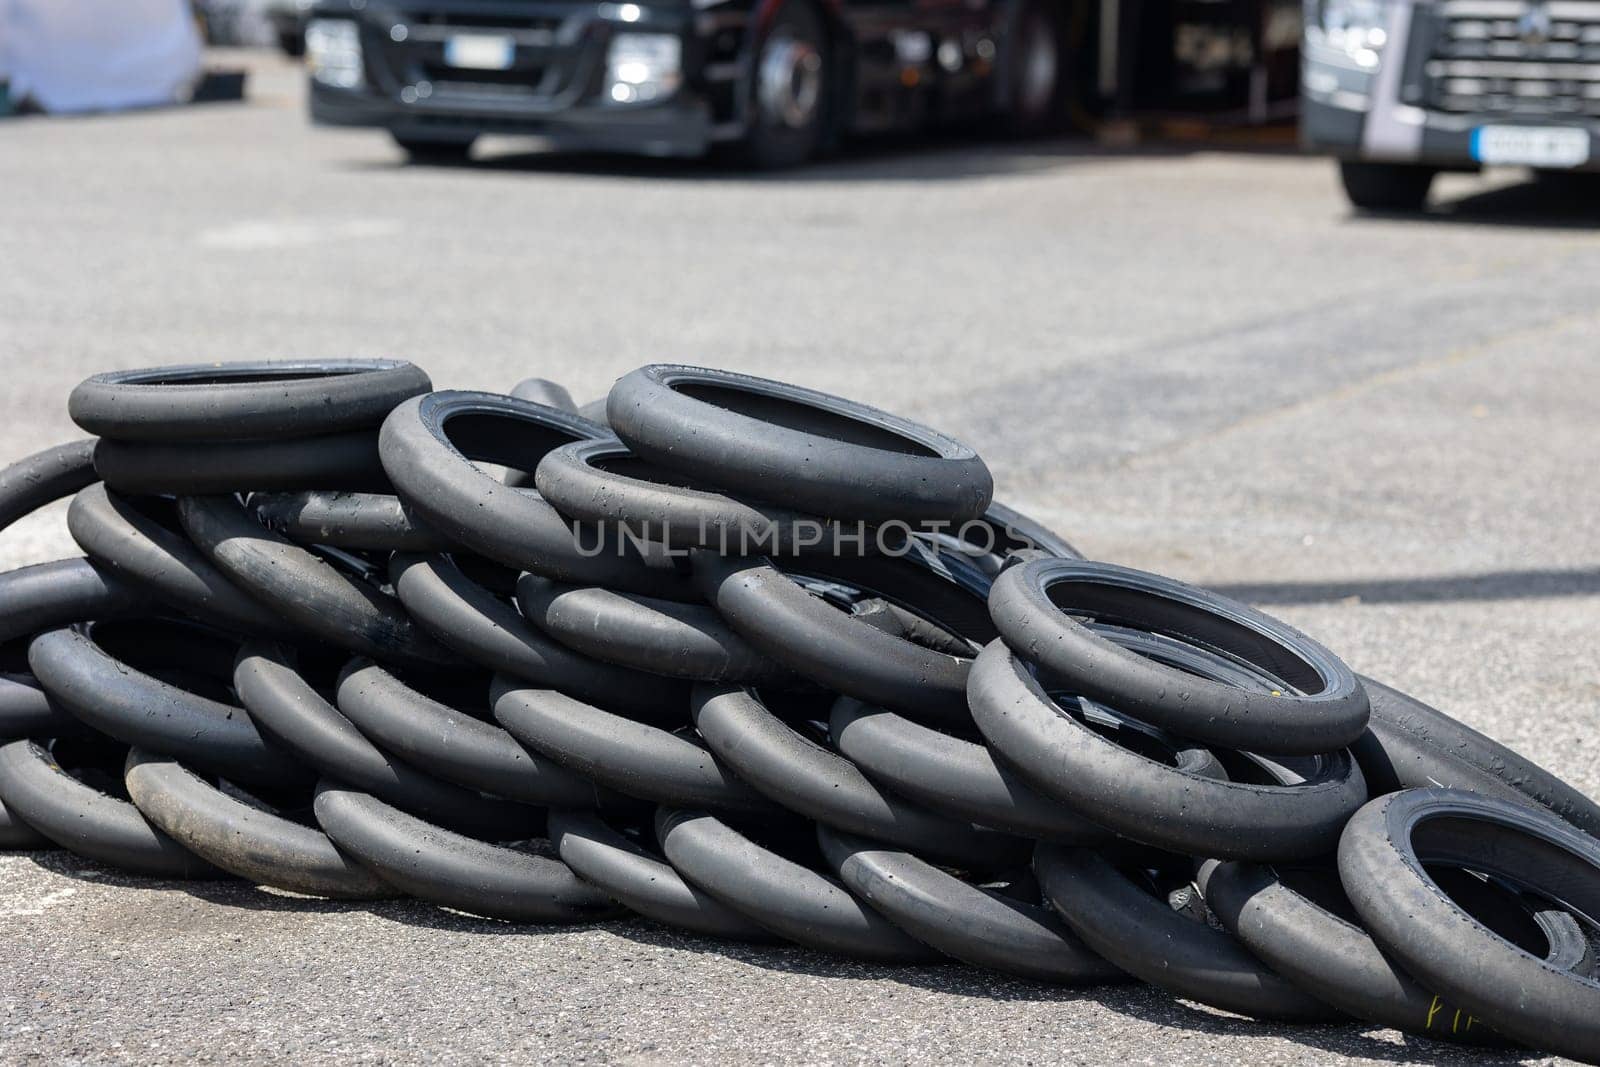 A Towering Stack of Rubber: A Pile of Tires in the Center of a Parking Lot by Studia72